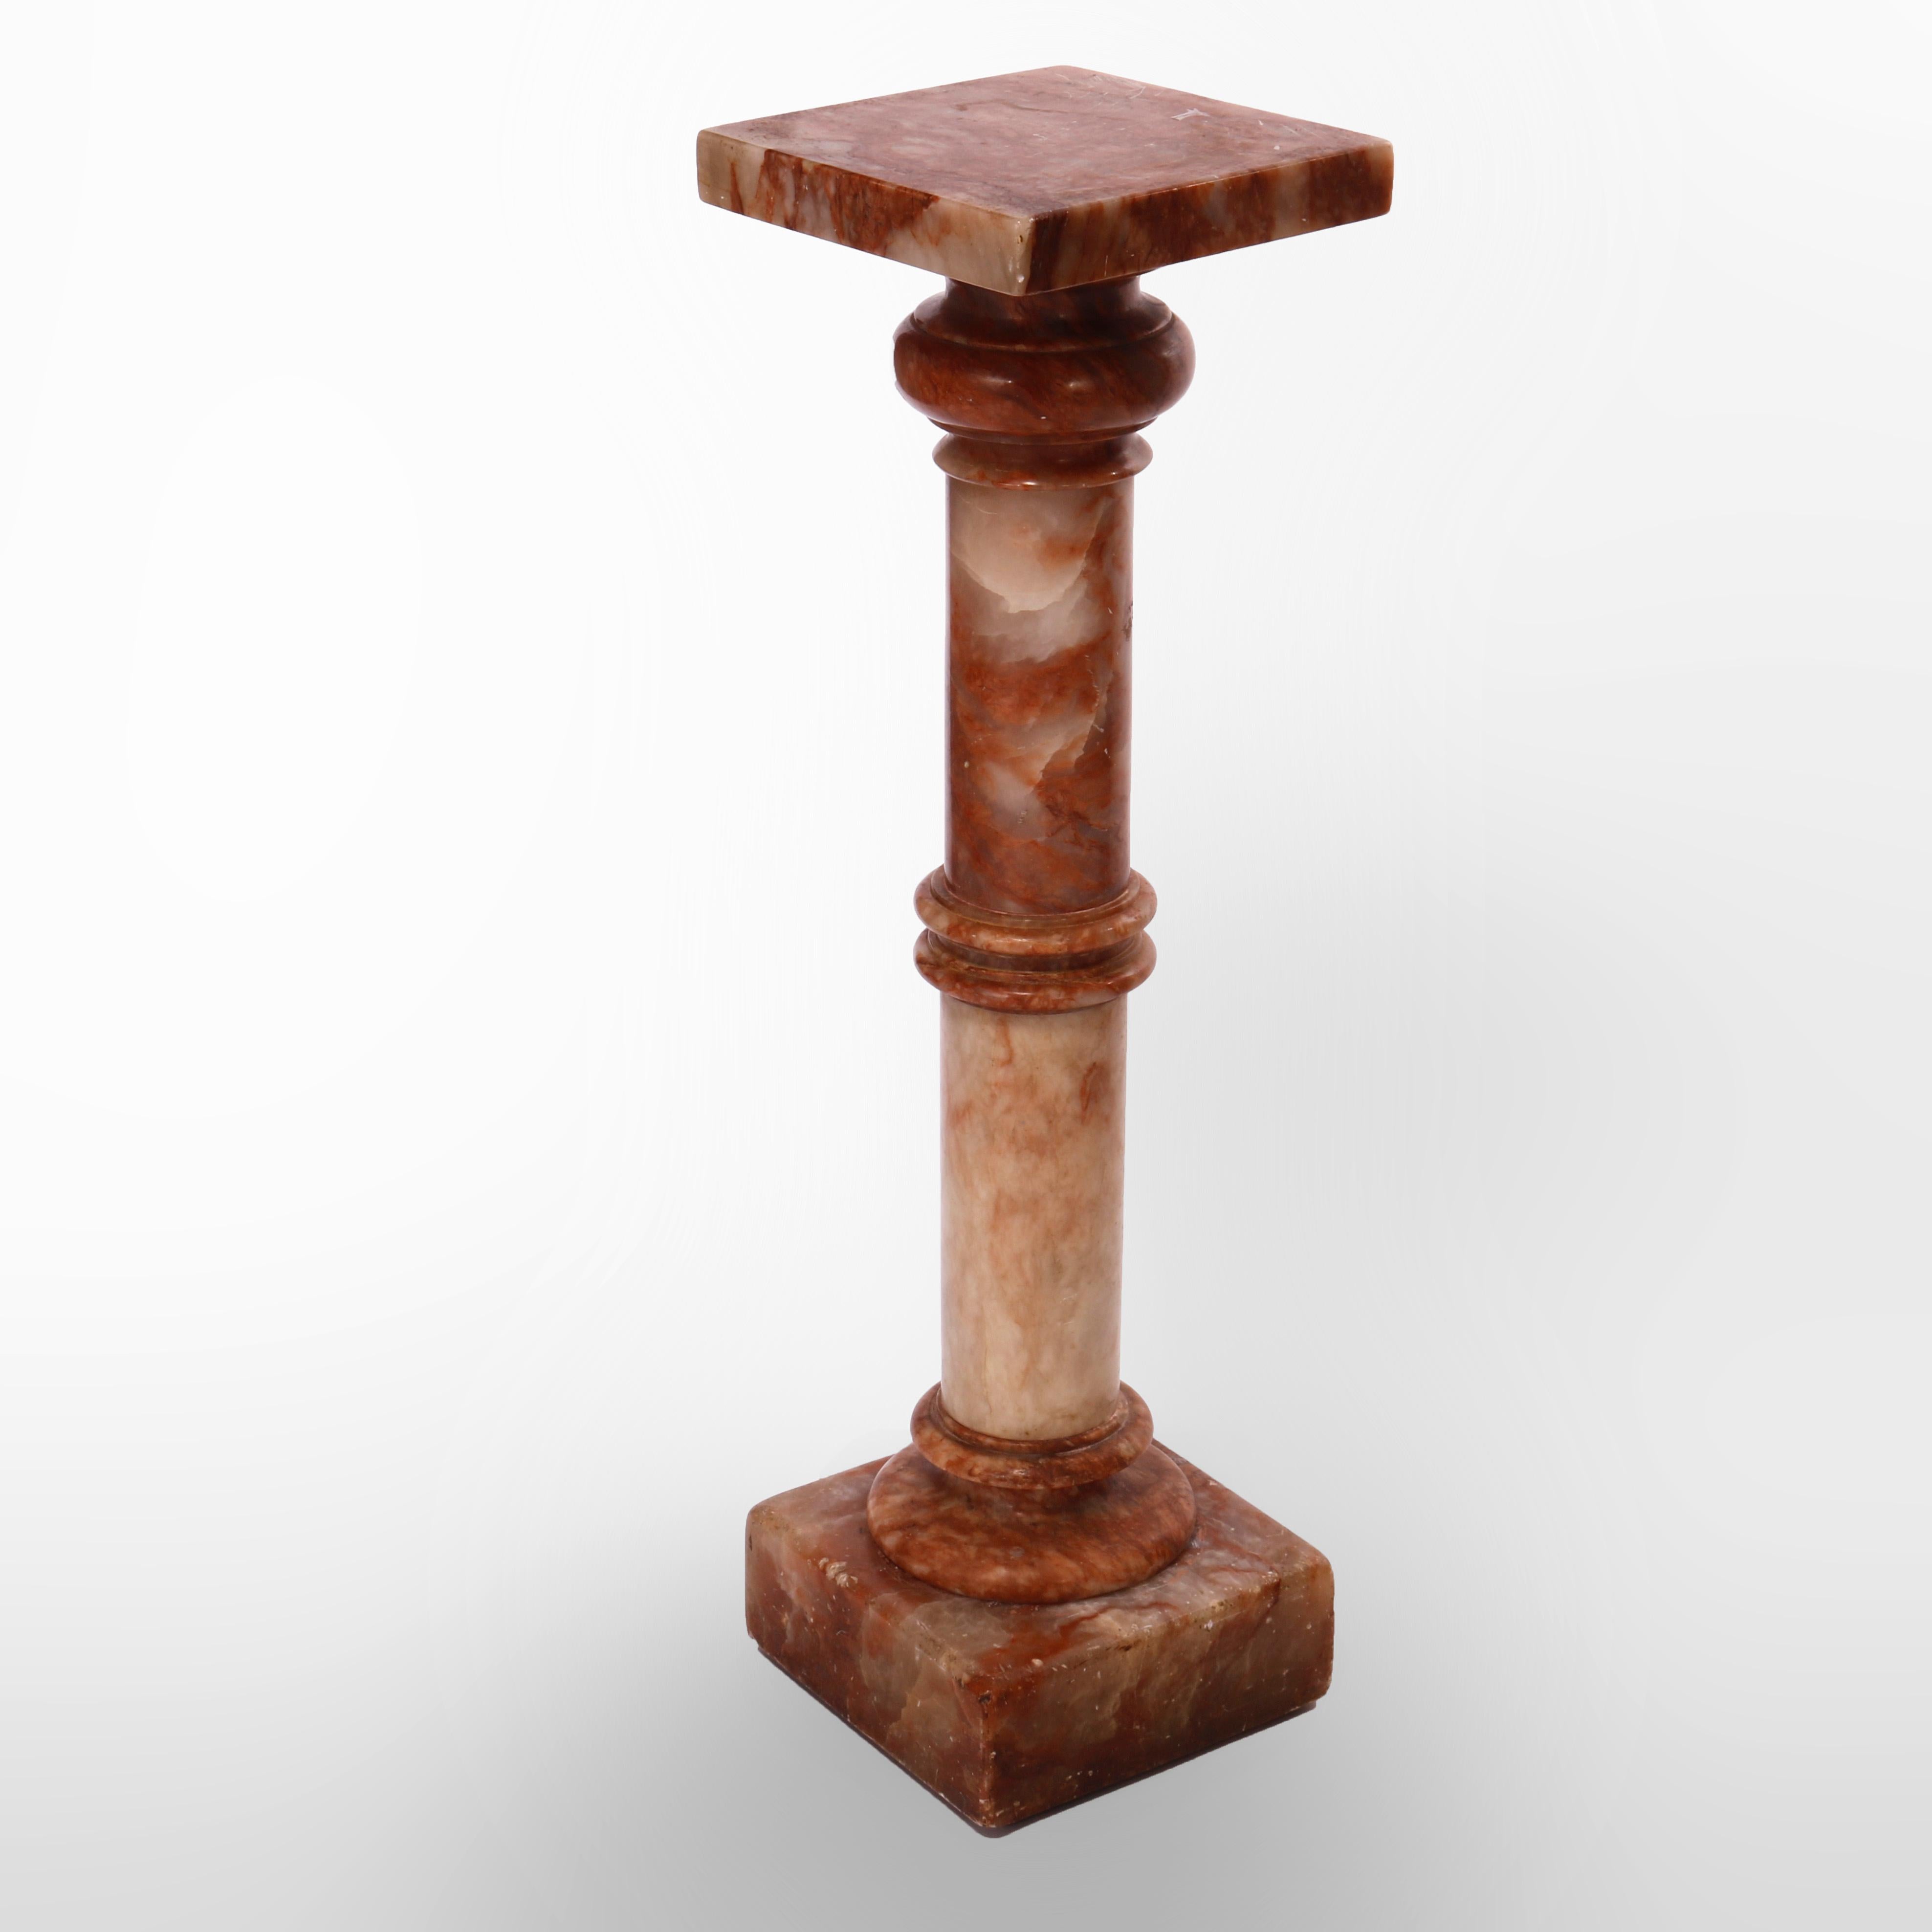 An antique sculpture pedestal offers onyx construction with square display over Doric form column and square foot, 19th C

Measures - 35.75'' H x 10'' x 10'' platform; 9'' x 9'' base.

Catalogue Note: Ask about DISCOUNTED DELIVERY RATES available to